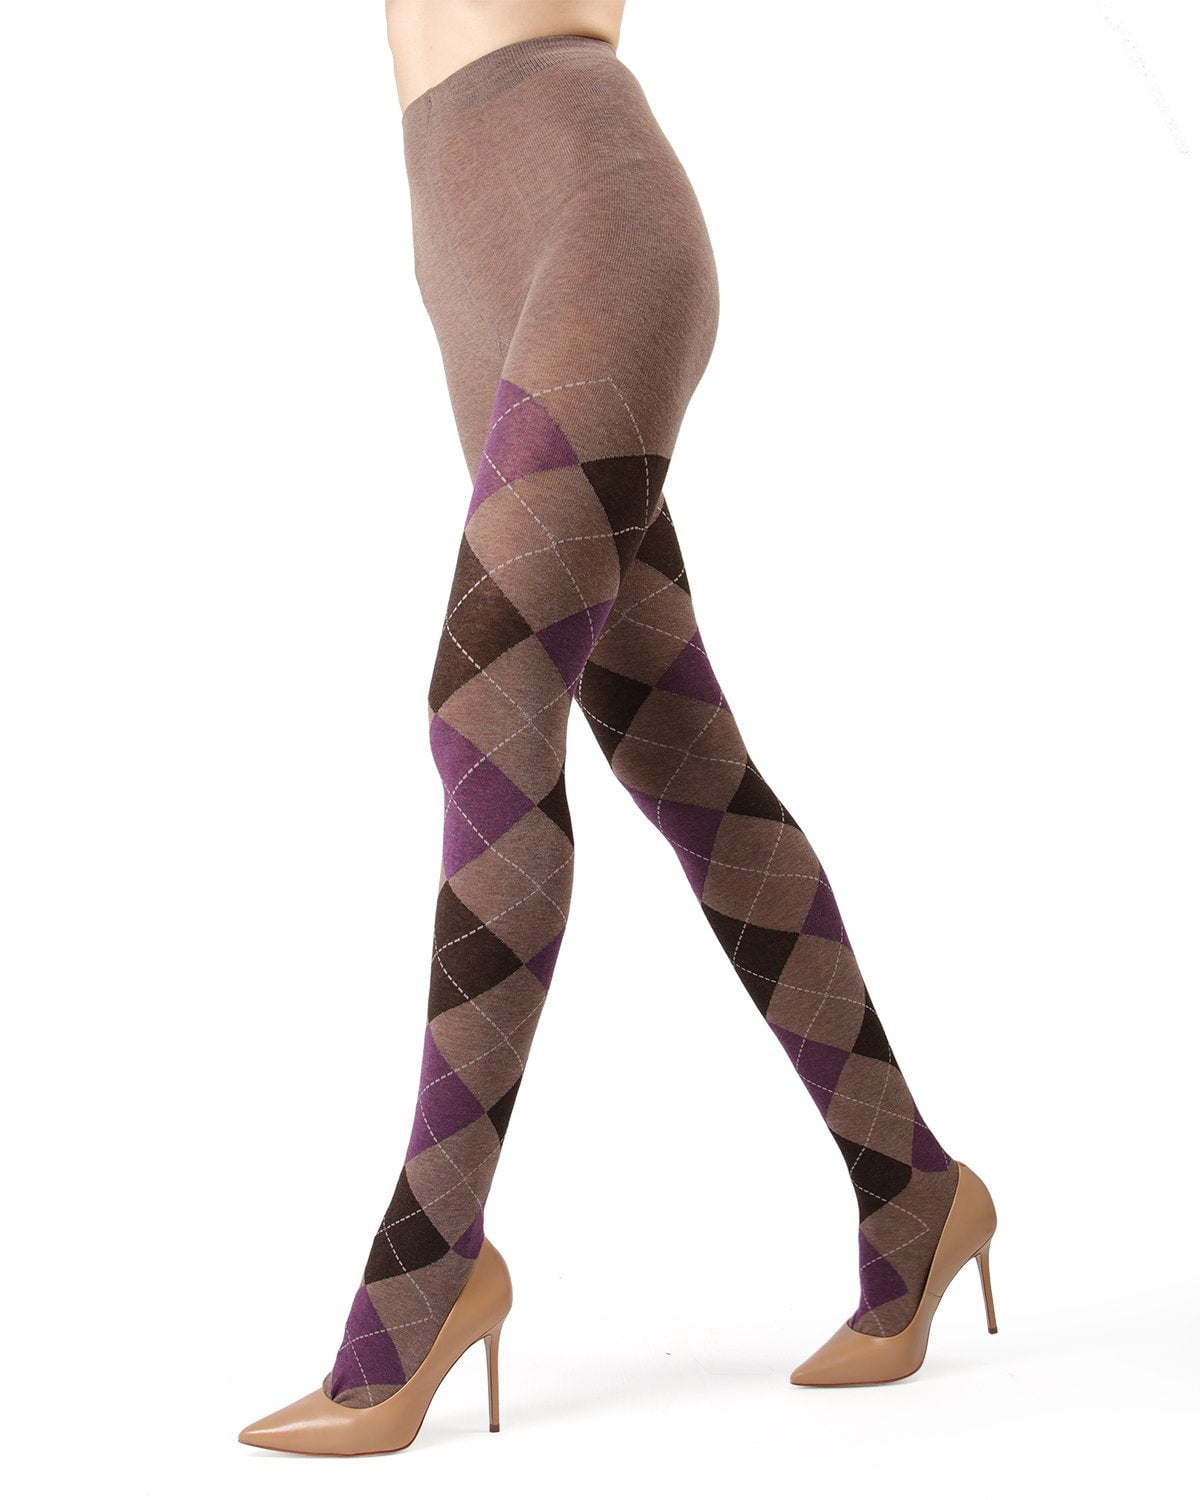 Ookwe Women Ultra Thin Silky Pantyhose Argyle Plaid Jacquard Sexy Sheer Tights Stockings Solid Color Stretchy Leggings Hosiery, Women's, Size: One